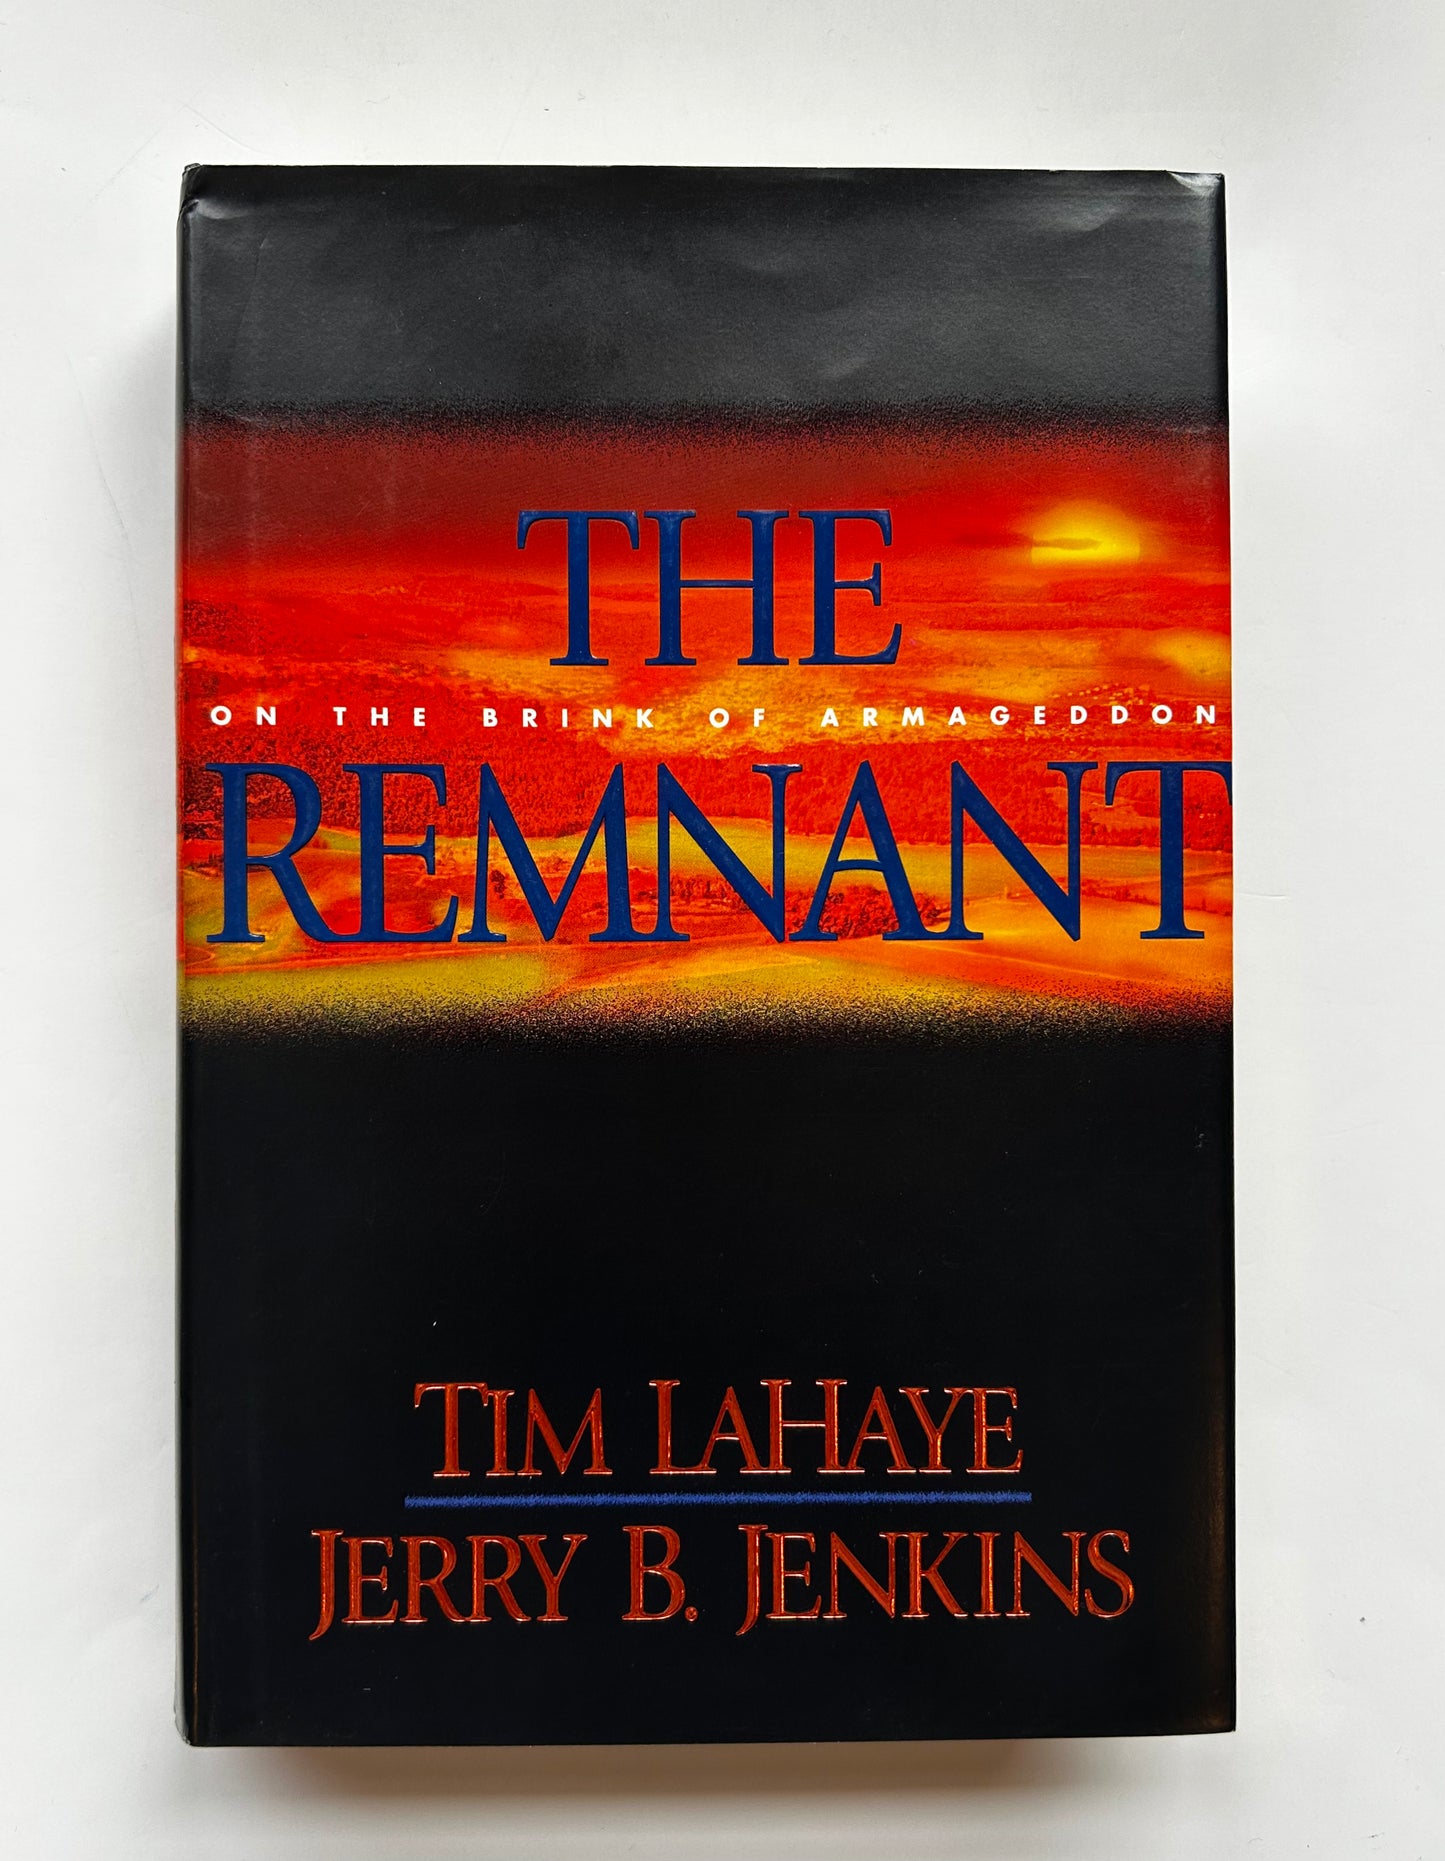 the remnant: on the brink of armageddon